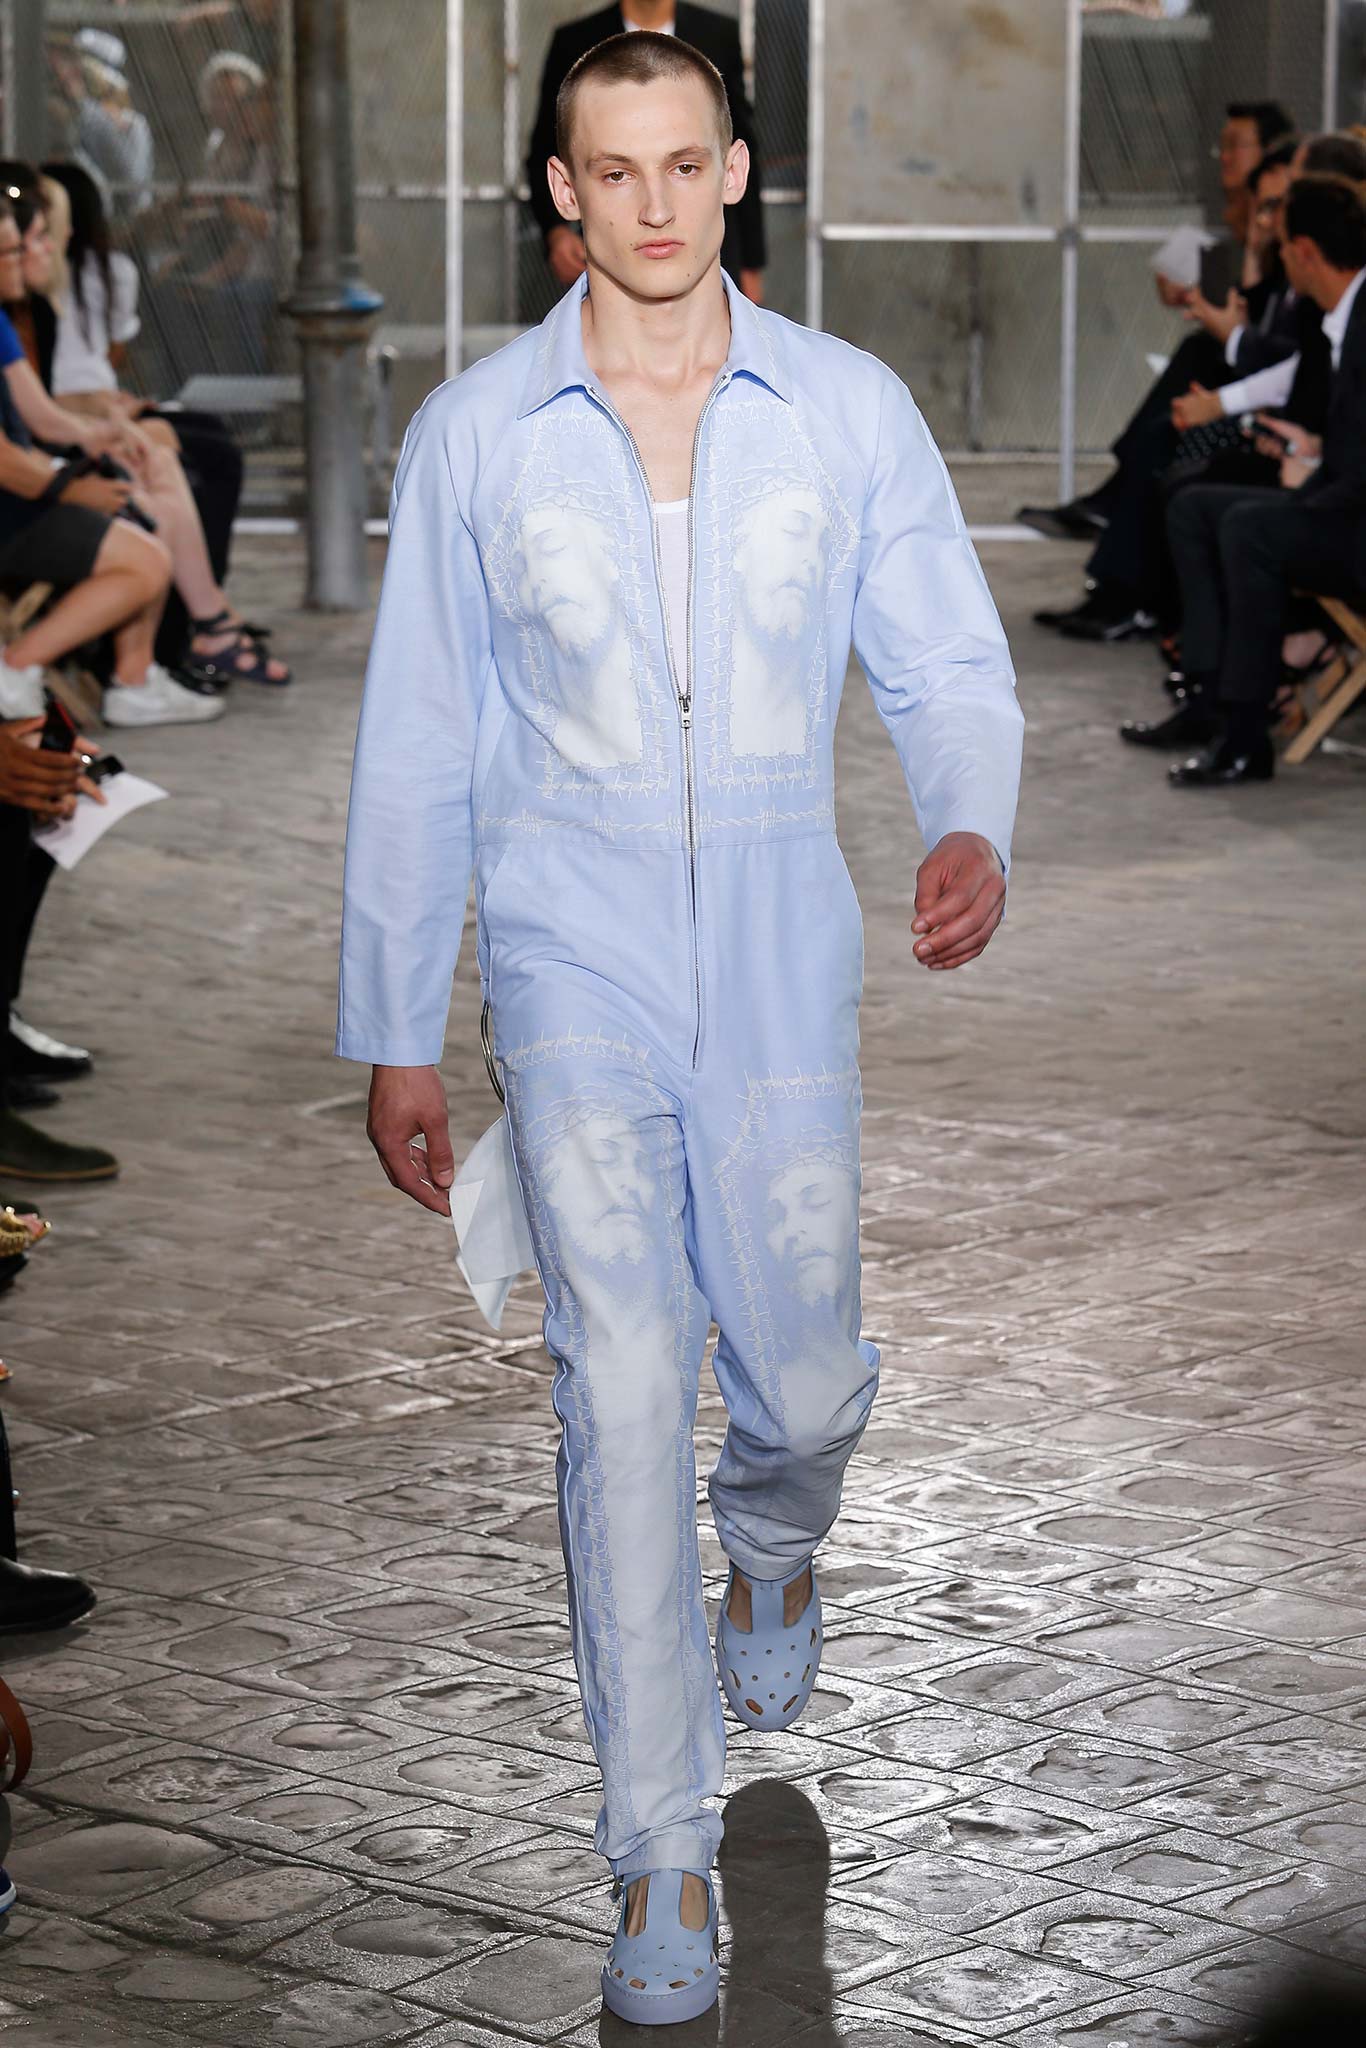 spring-2016-menswear-trends-06-jumpsuits-03